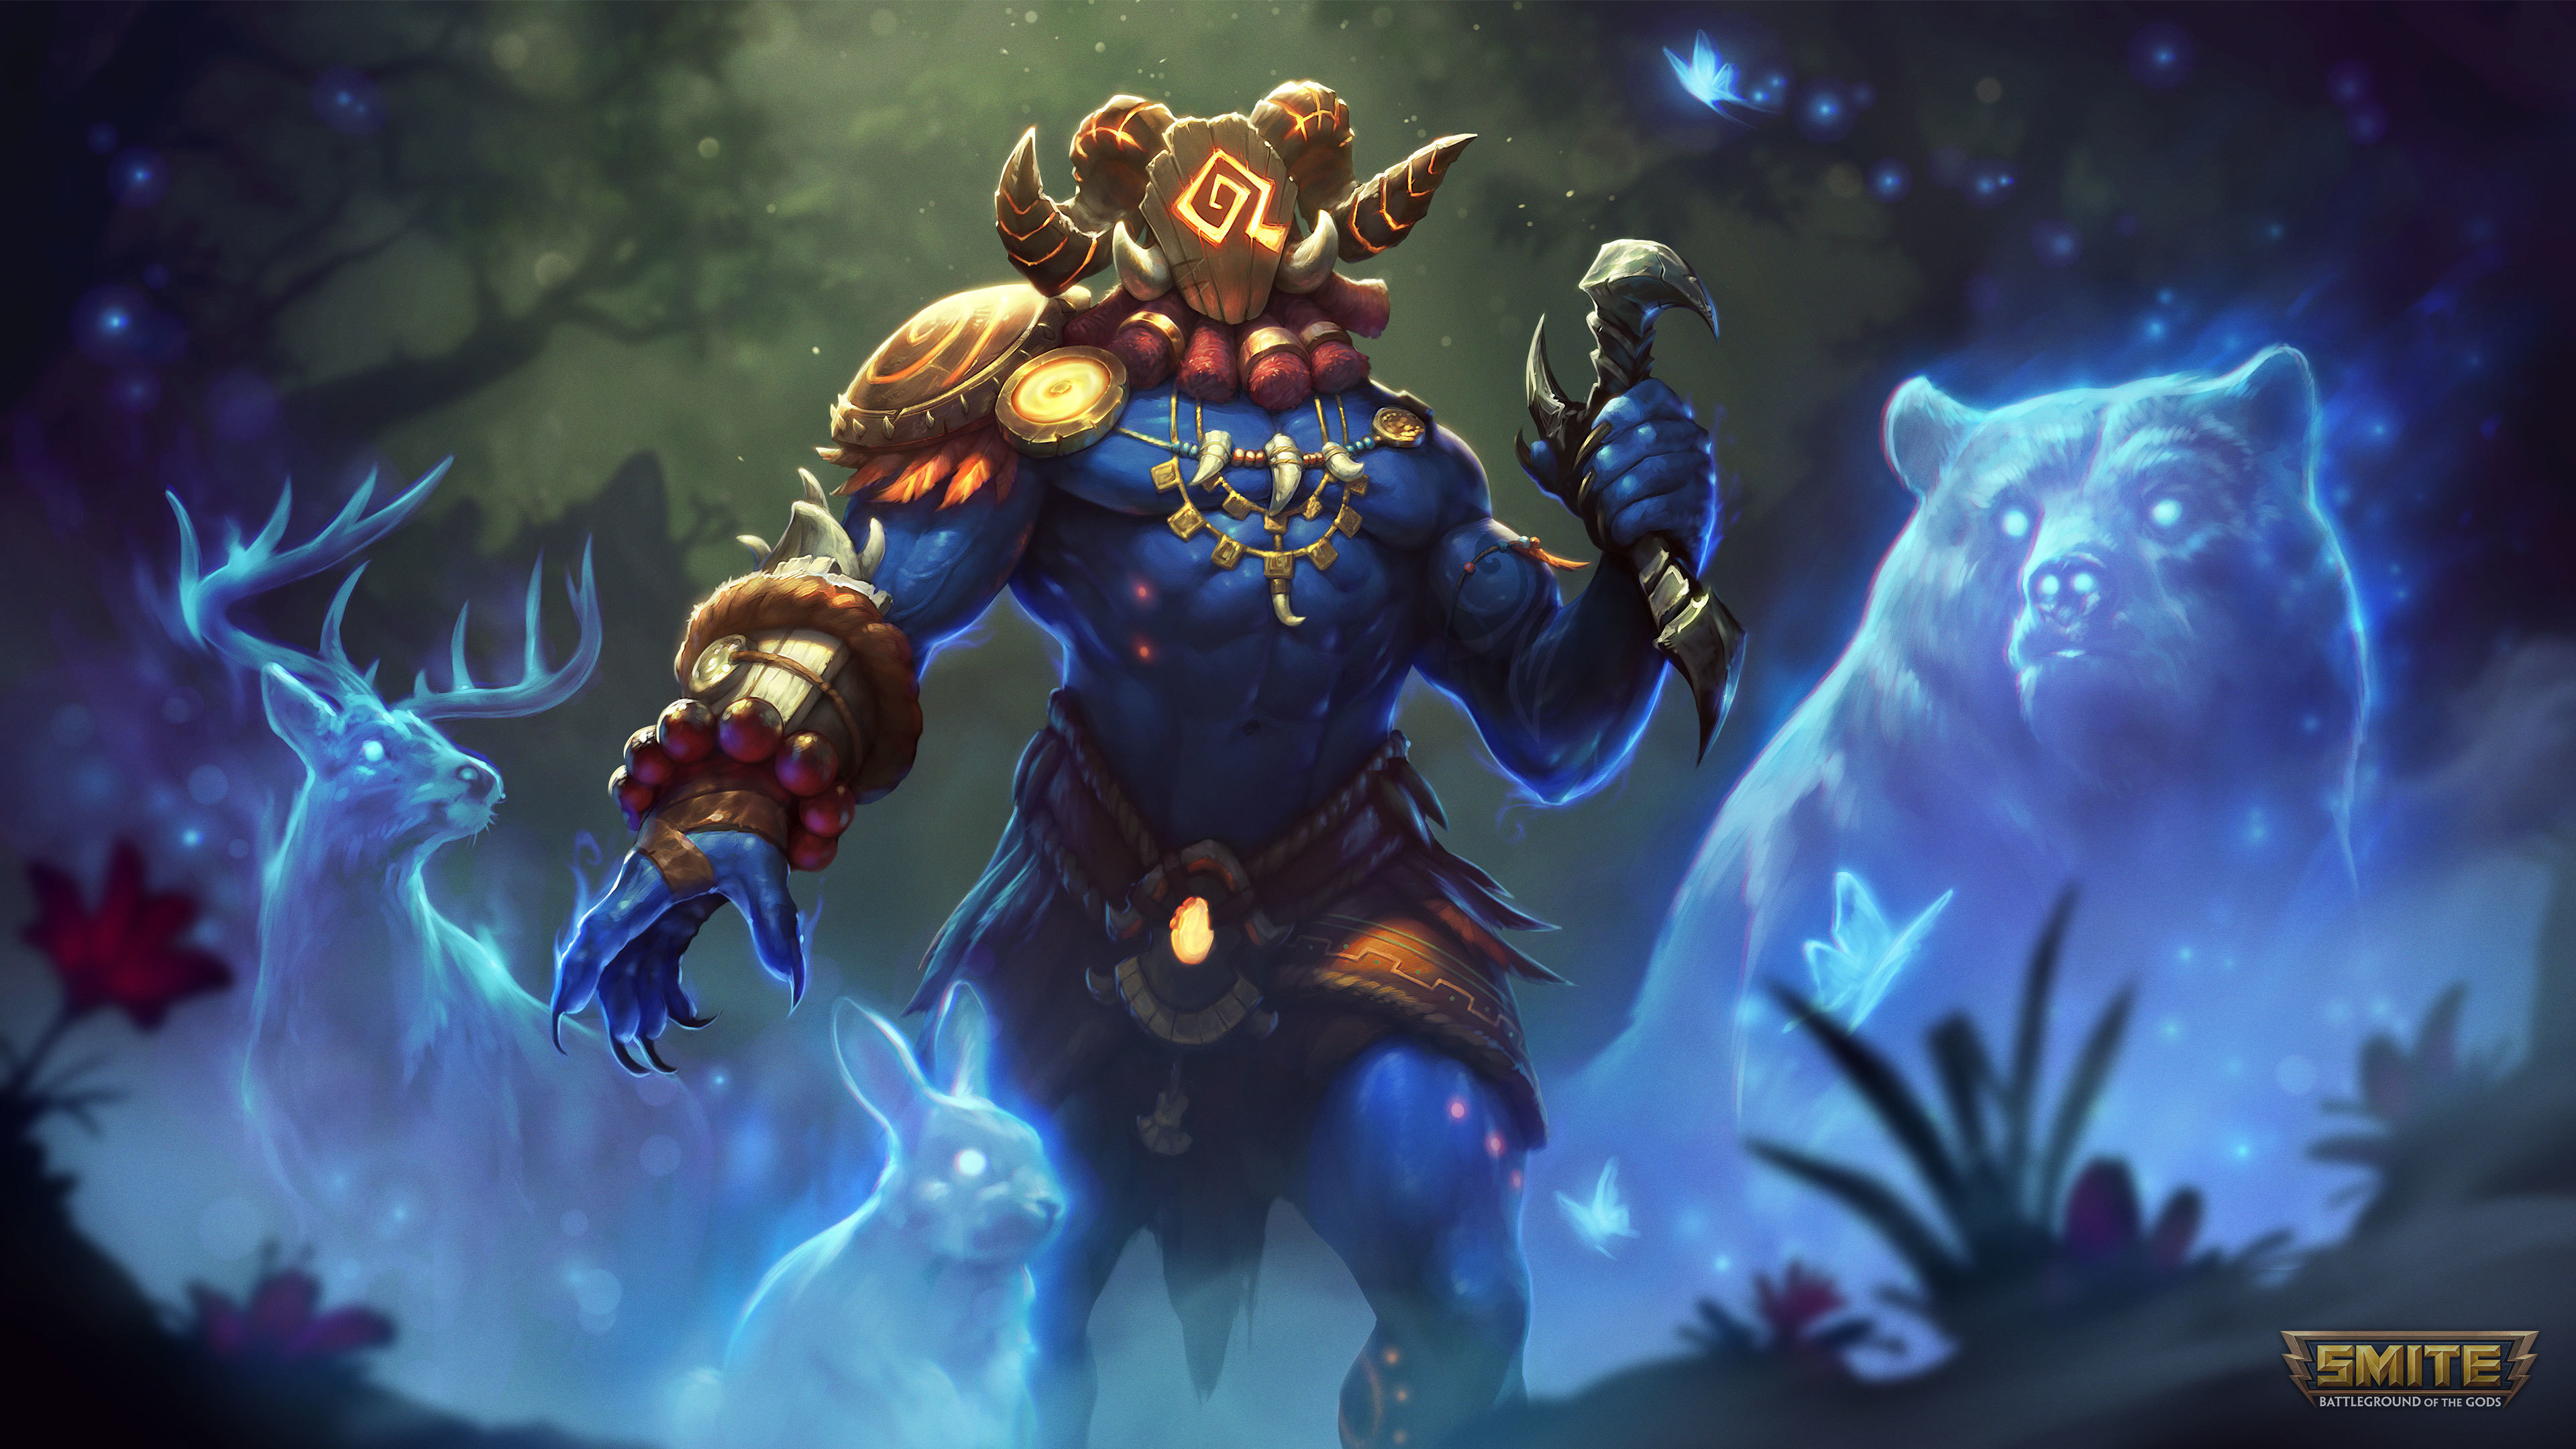 3840x2160 10+ Cernunnos (Smite) HD Wallpapers and Backgrounds